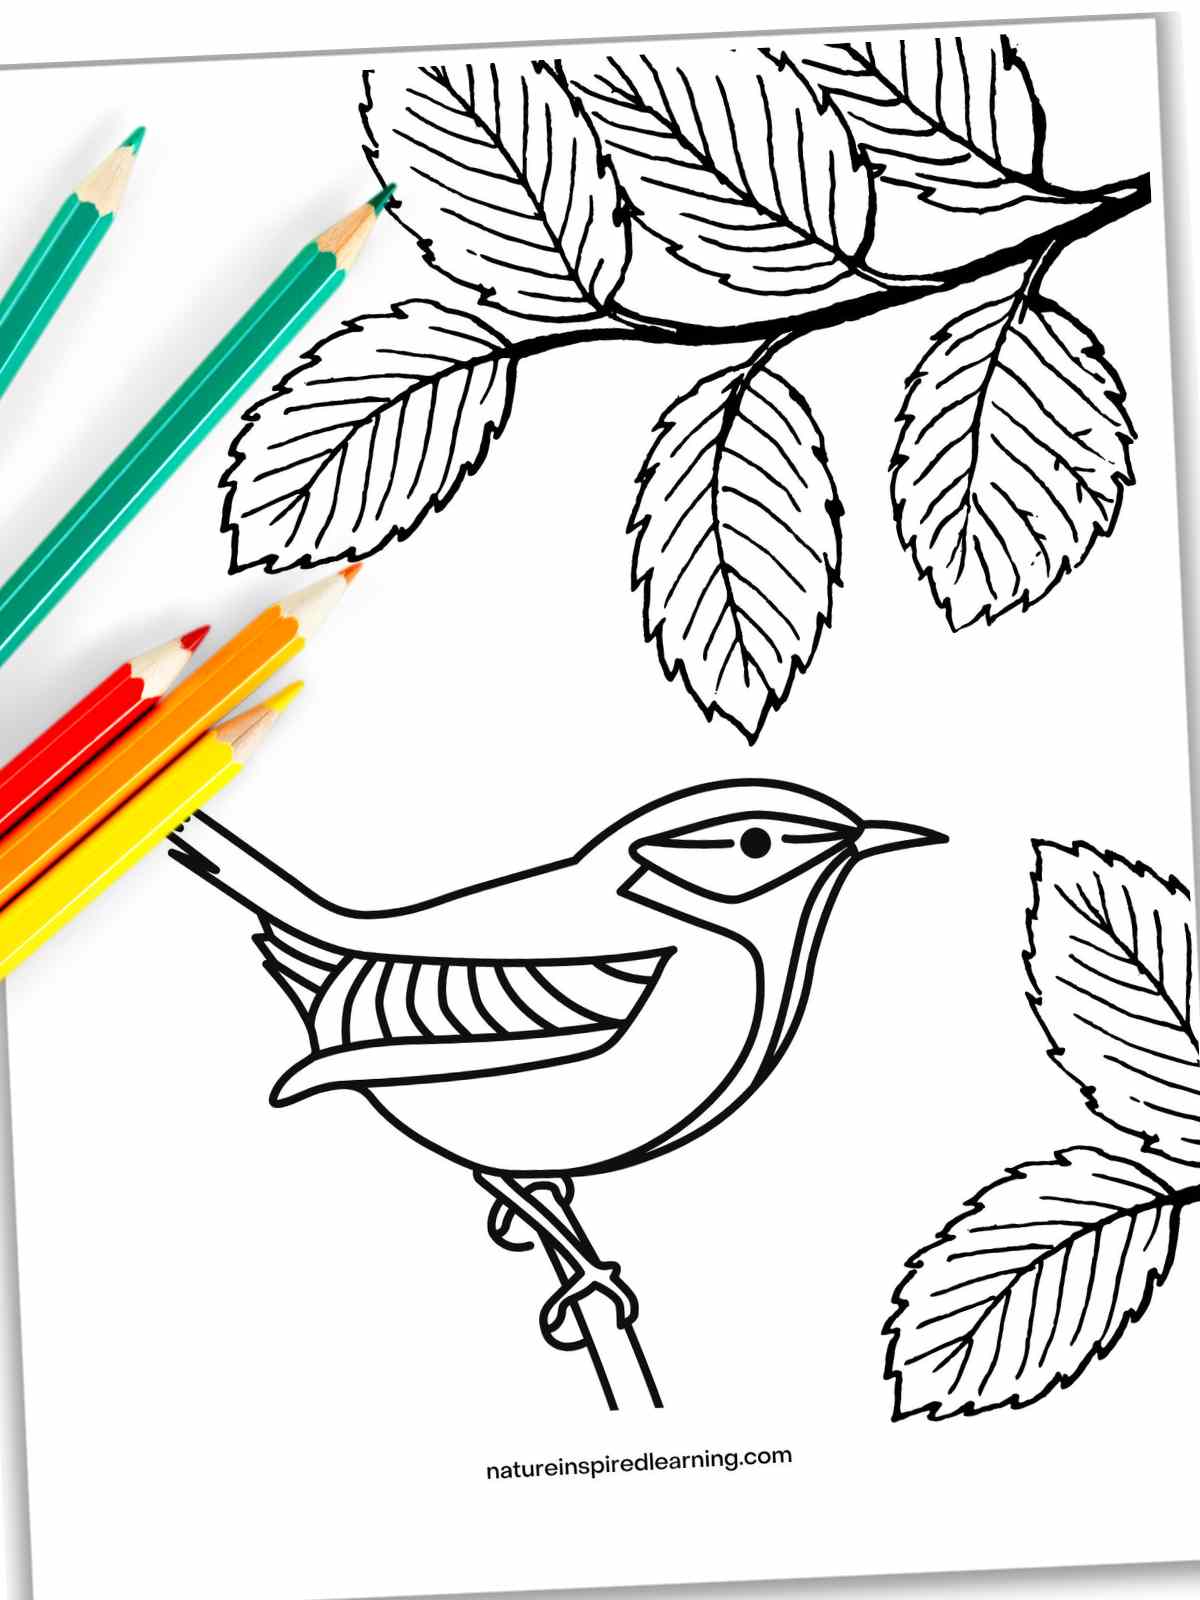 Basic black and white bird coloring page with one bird on a branch next to leaves. Coloring pencils on the upper left side.